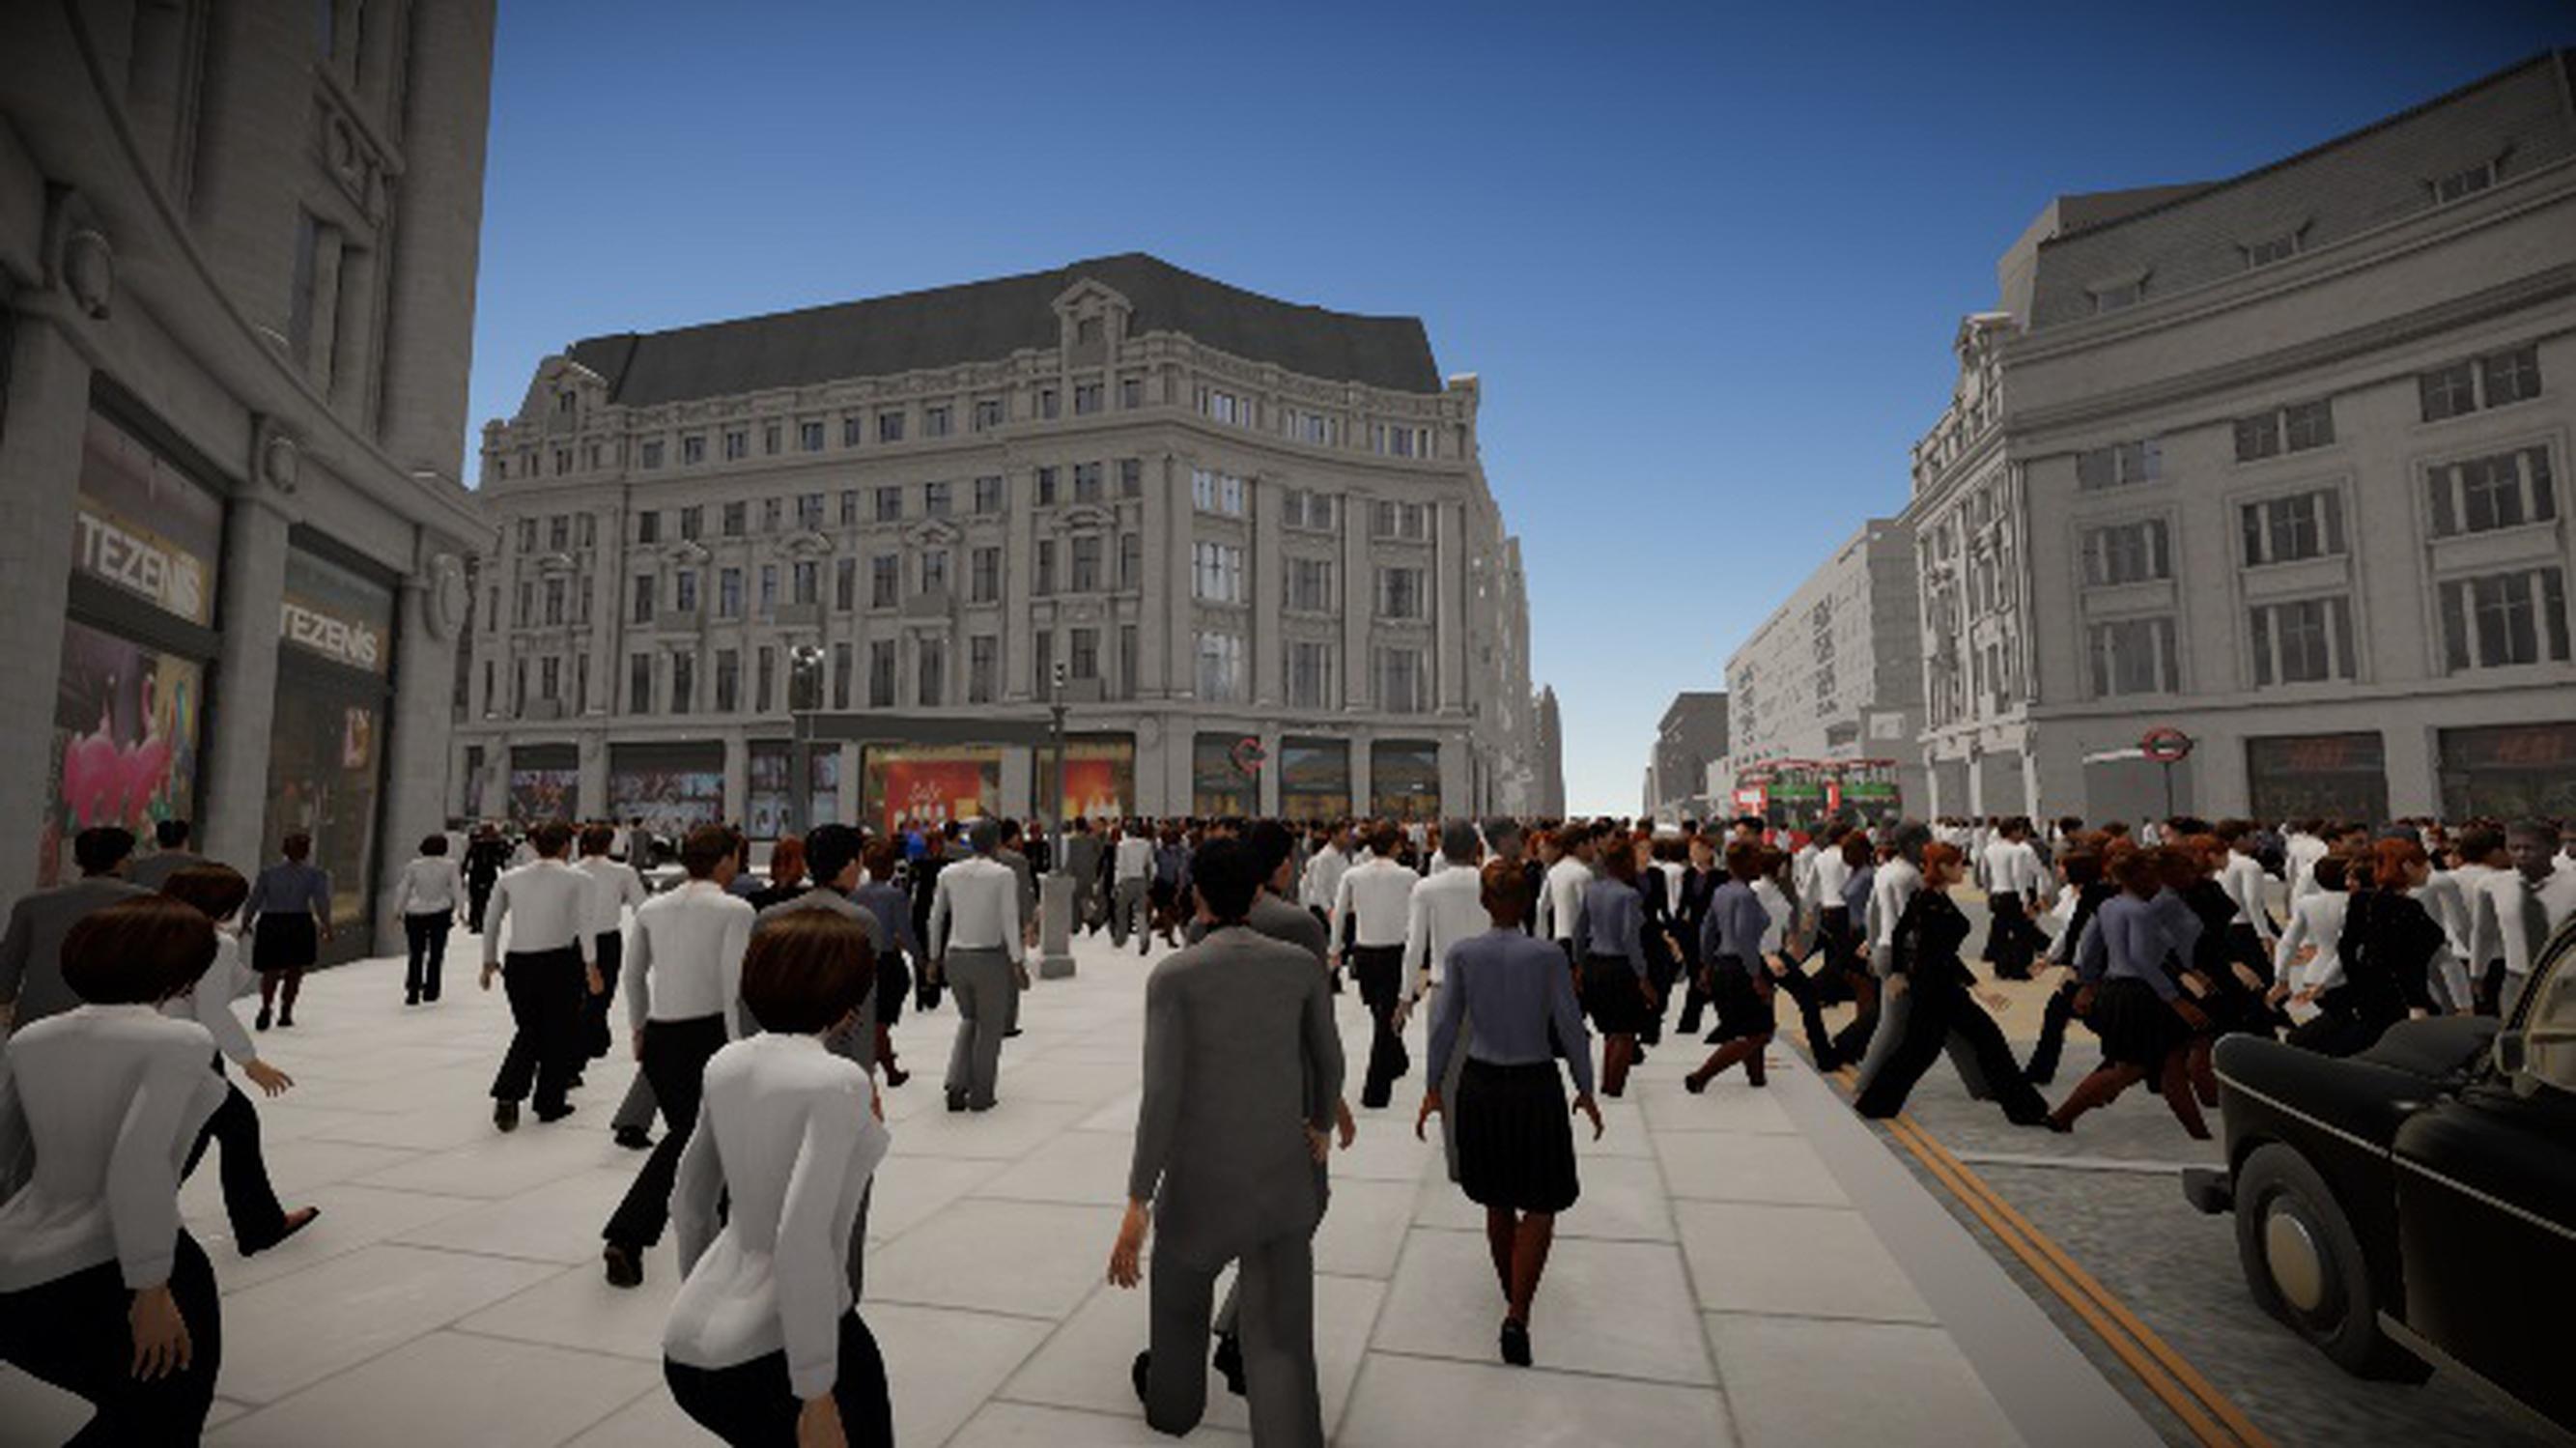 The innovative approach undertaken by Atkins to simulate pedestrian movements in Oxford Street allows us to improve our understanding of existing and future conditions, as well as providing insights for the stakeholders involved